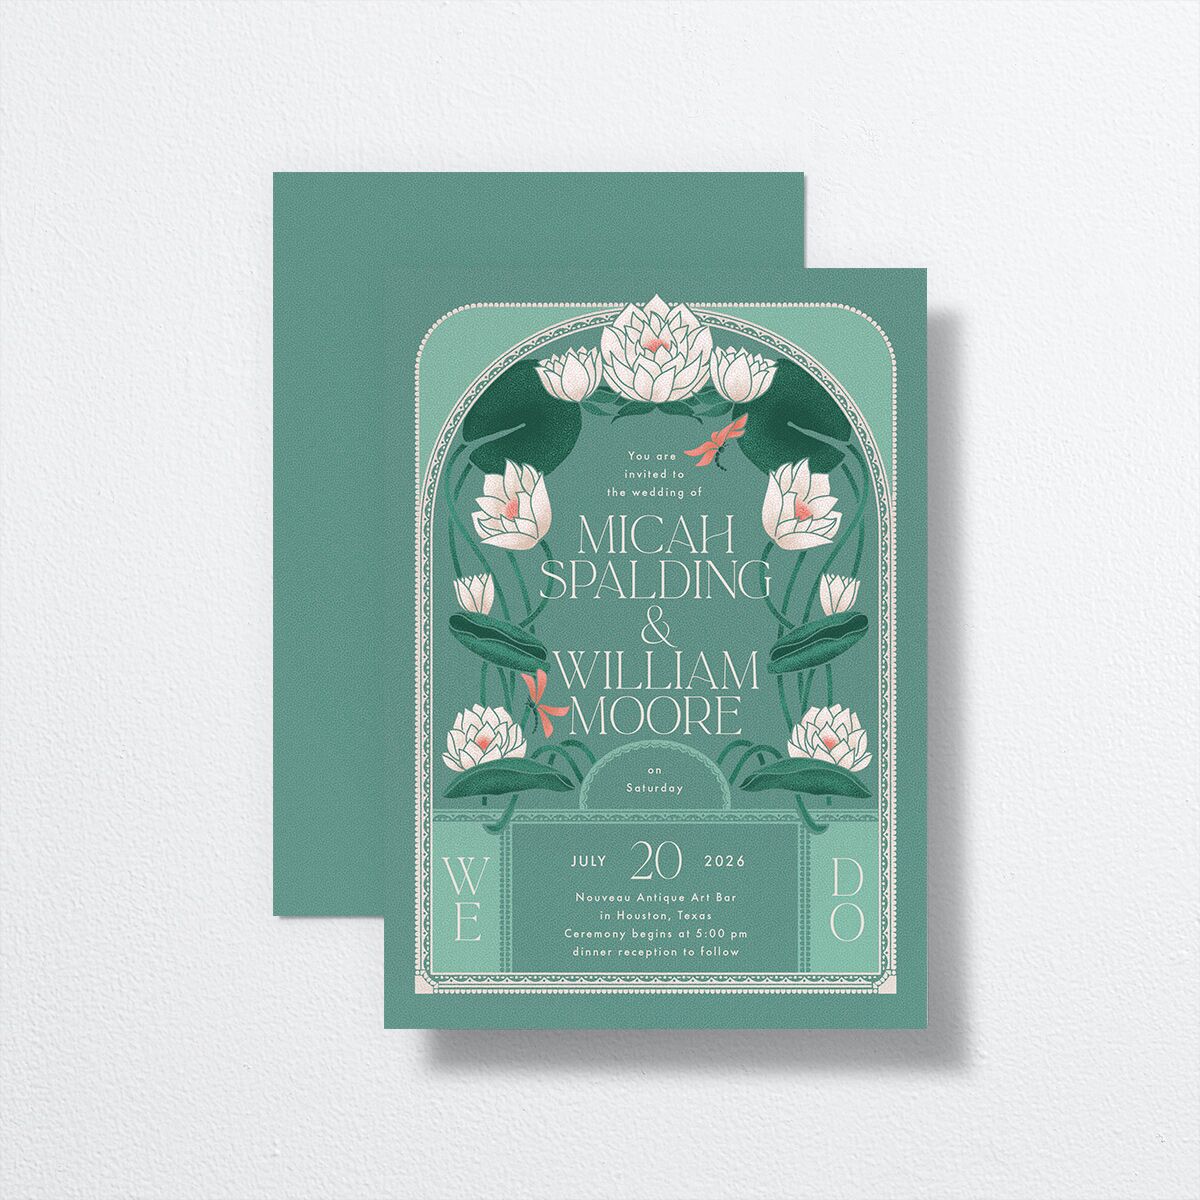 Twilight Pond Wedding Invitations front-and-back